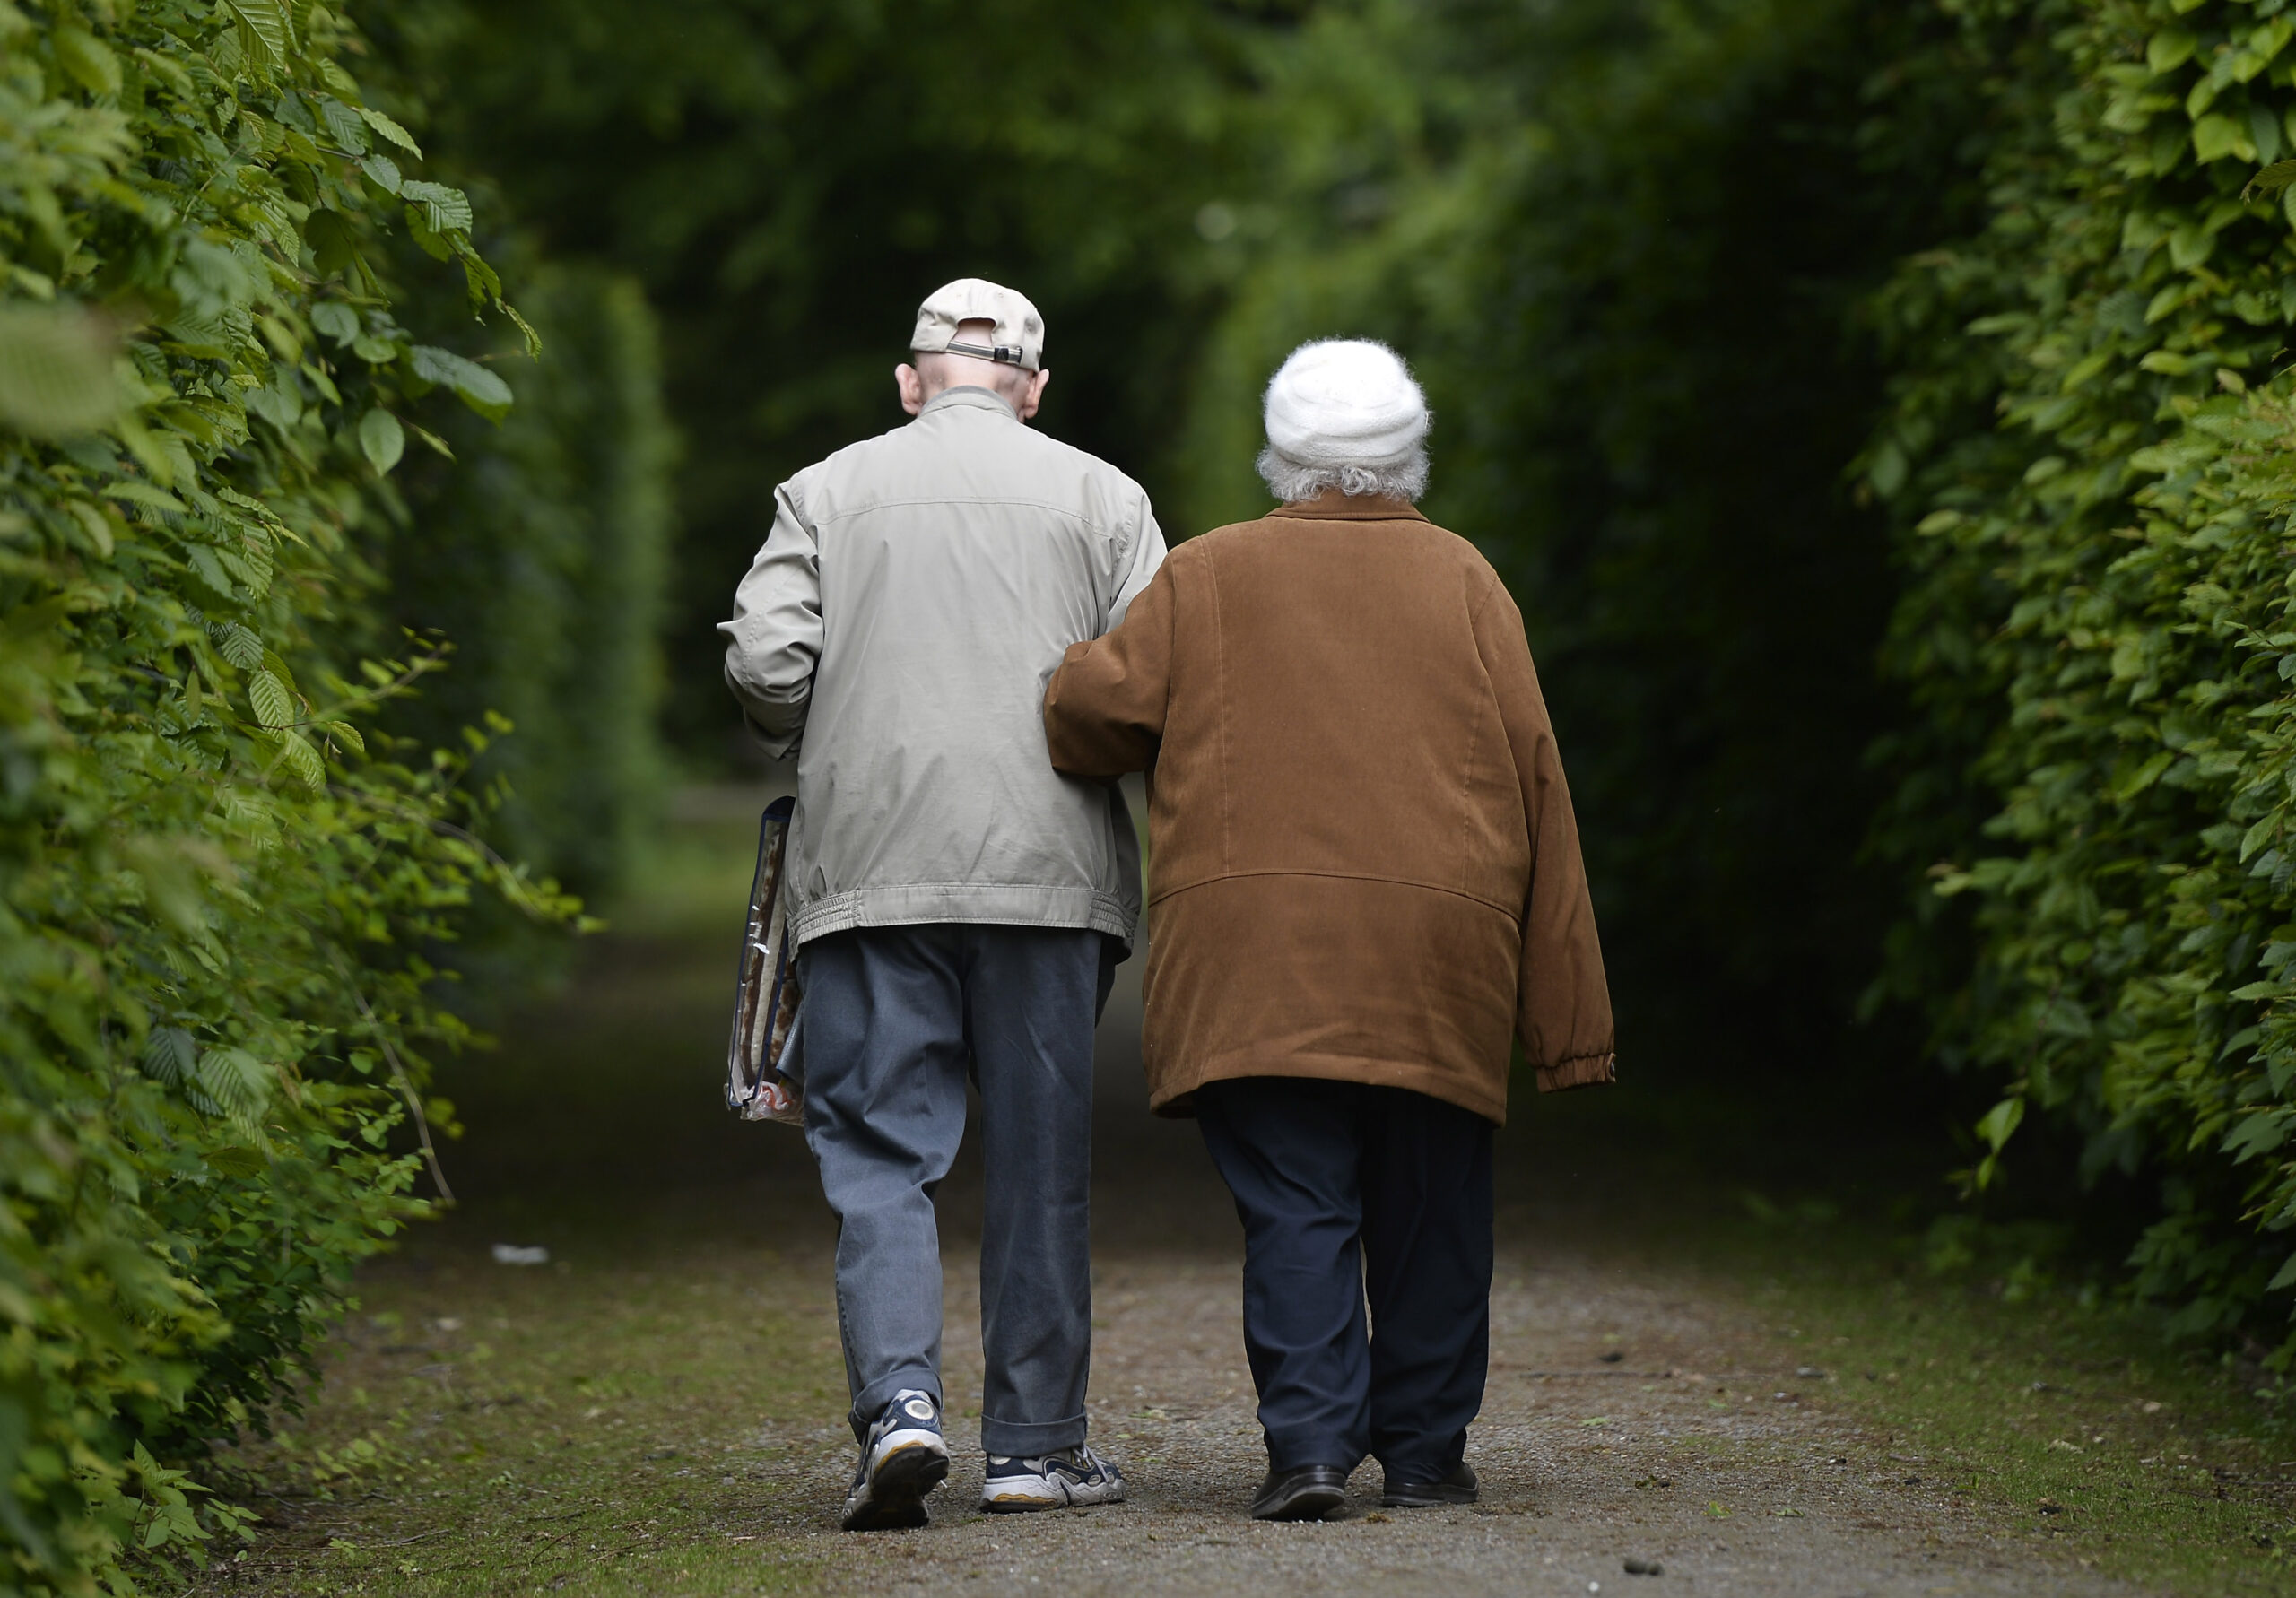 Two older people walk down a hedged trail with their backs to the camera.